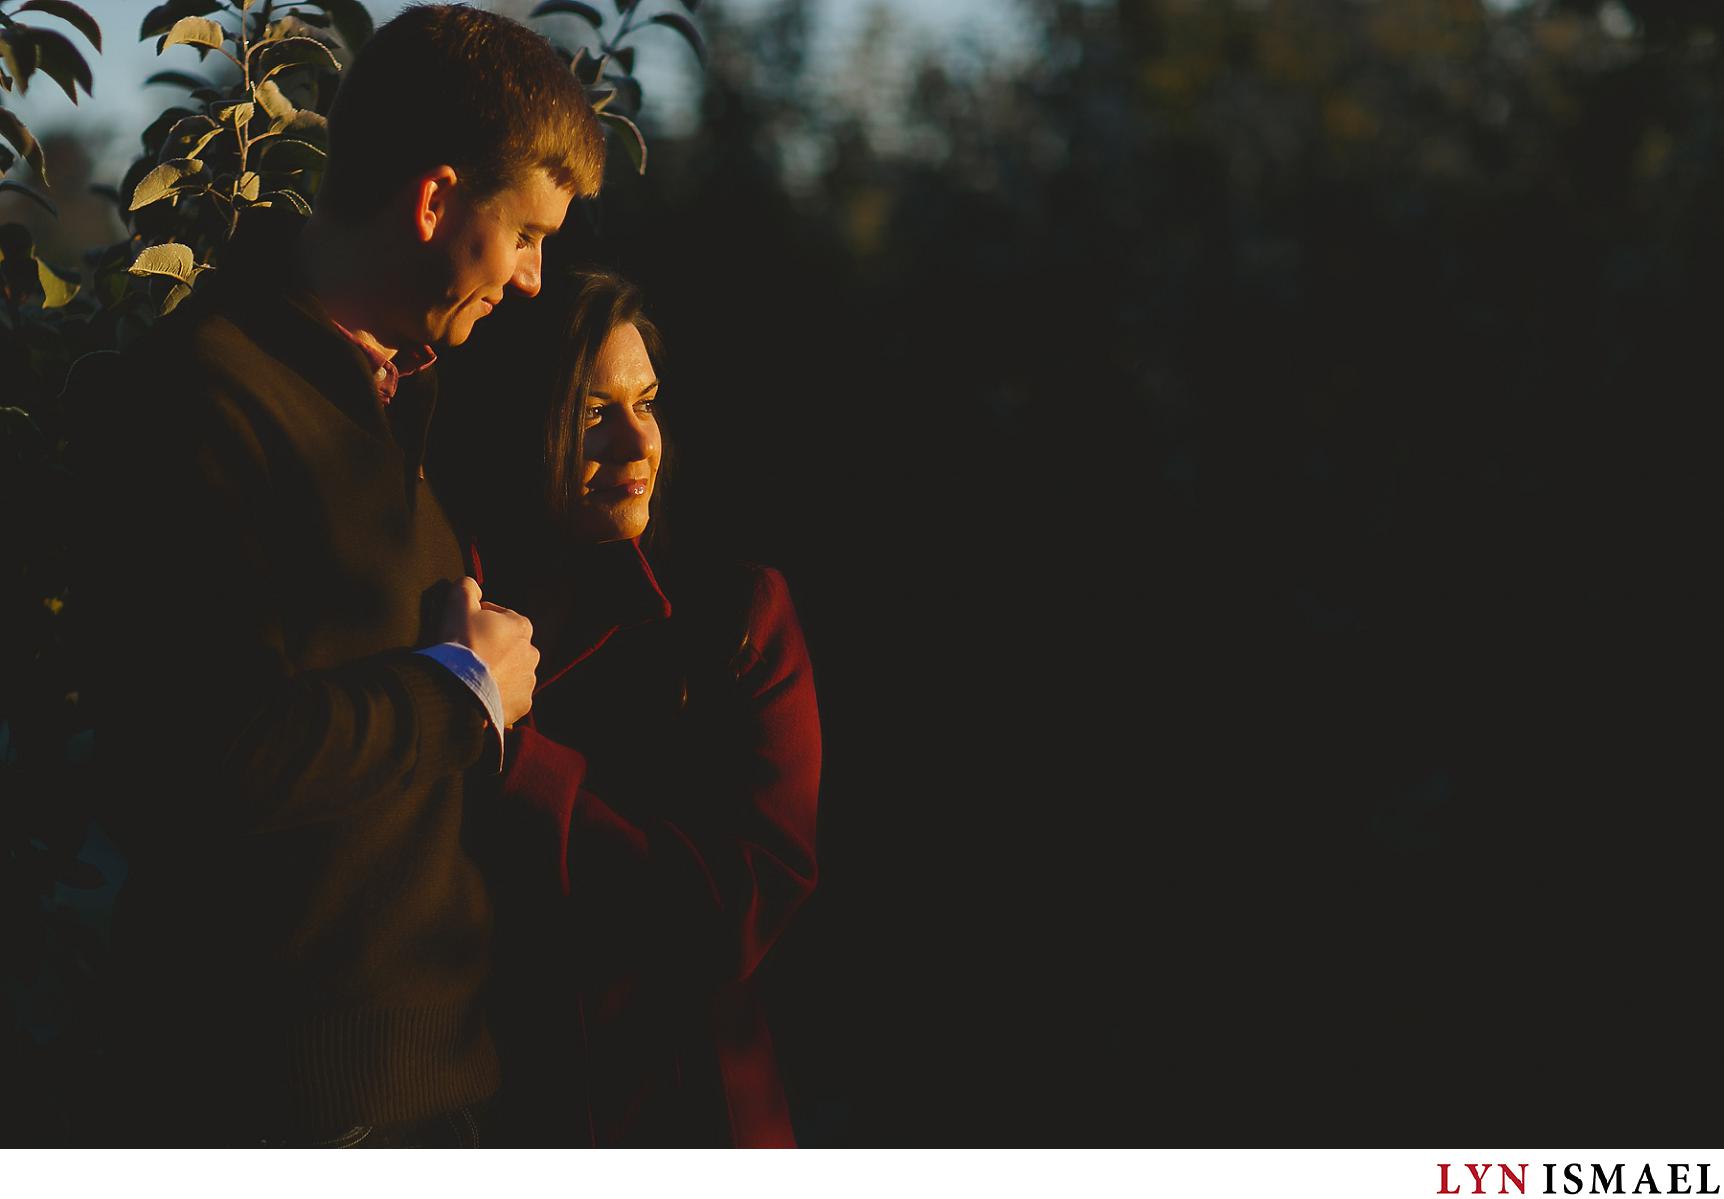 Sunrise engagement session in St Jacob's, Ontario.